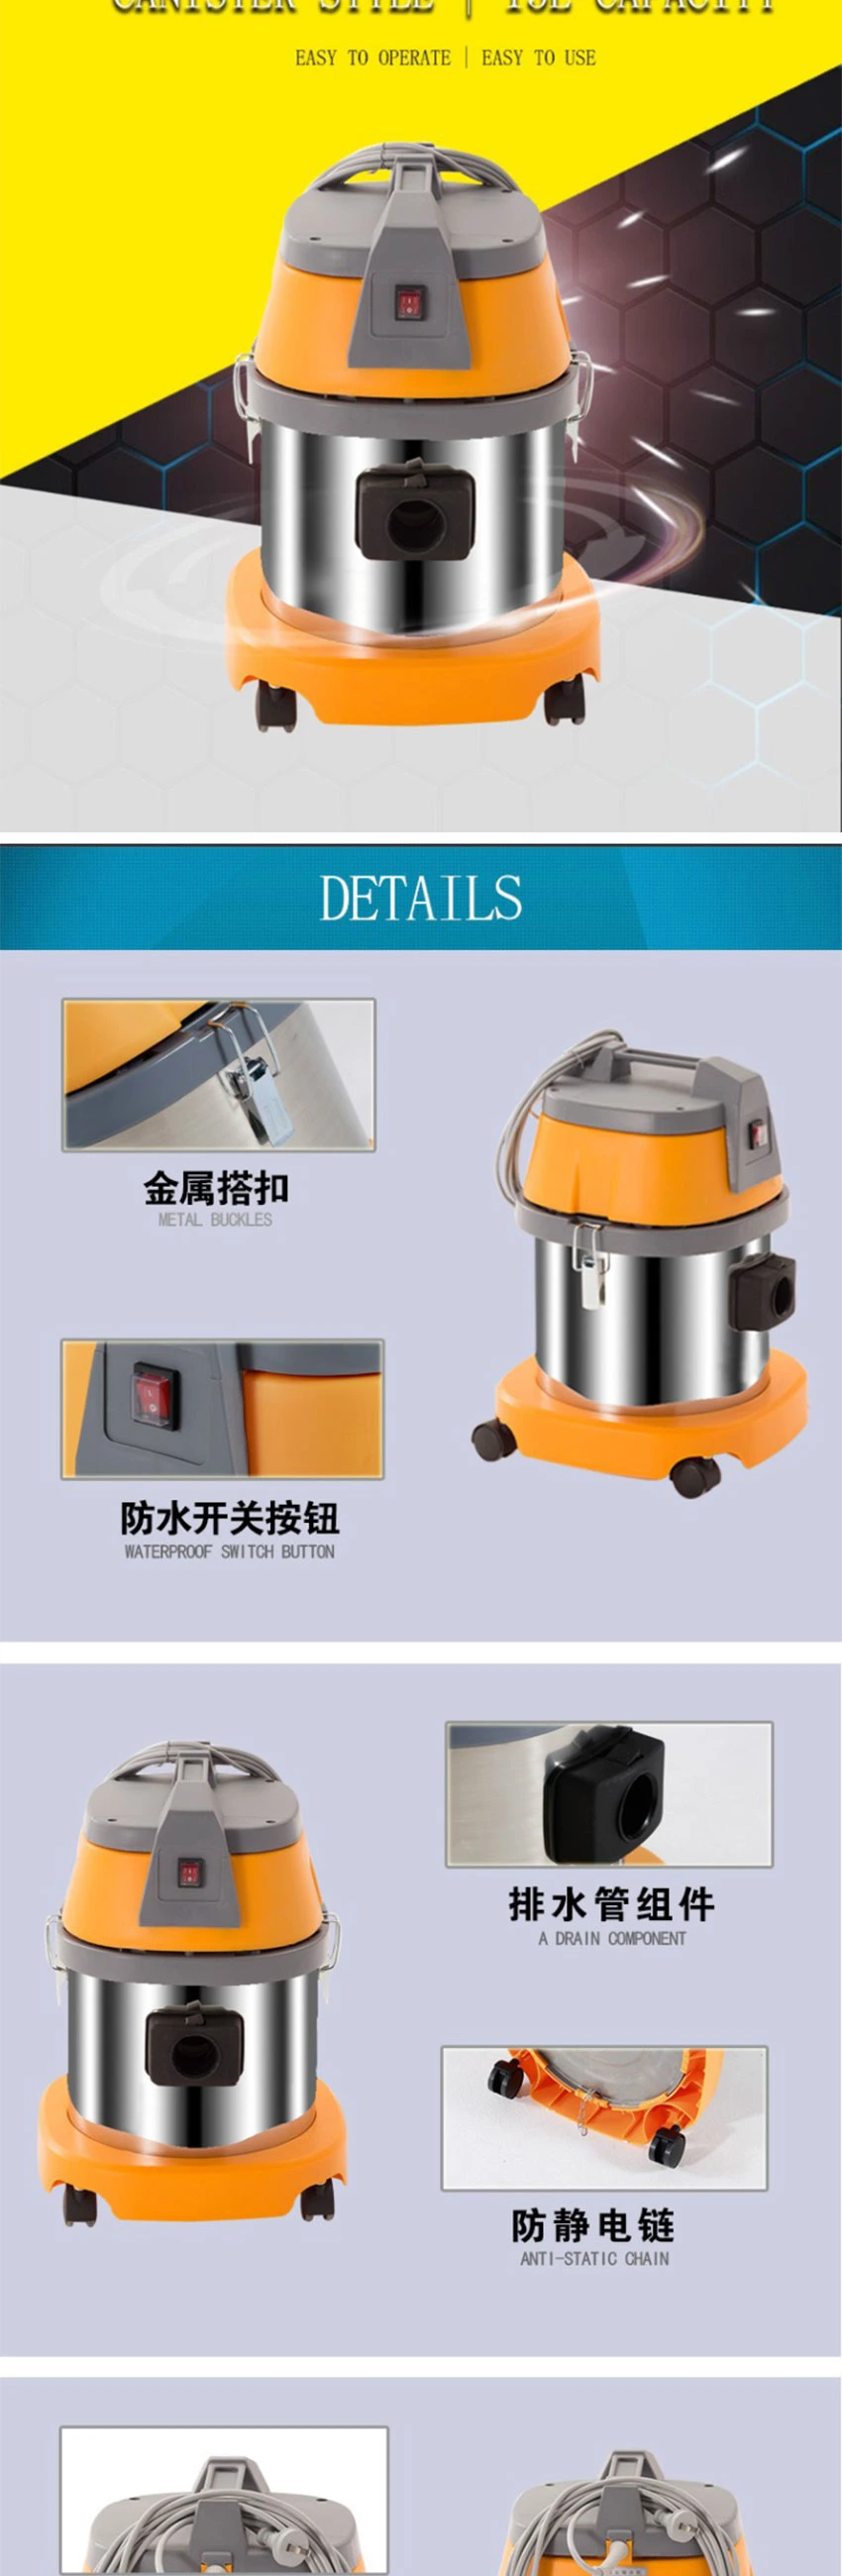 Portable 1000W 15L Vacuum Cleaner Electric Vacuum Cleaner for Household Car Cleaning